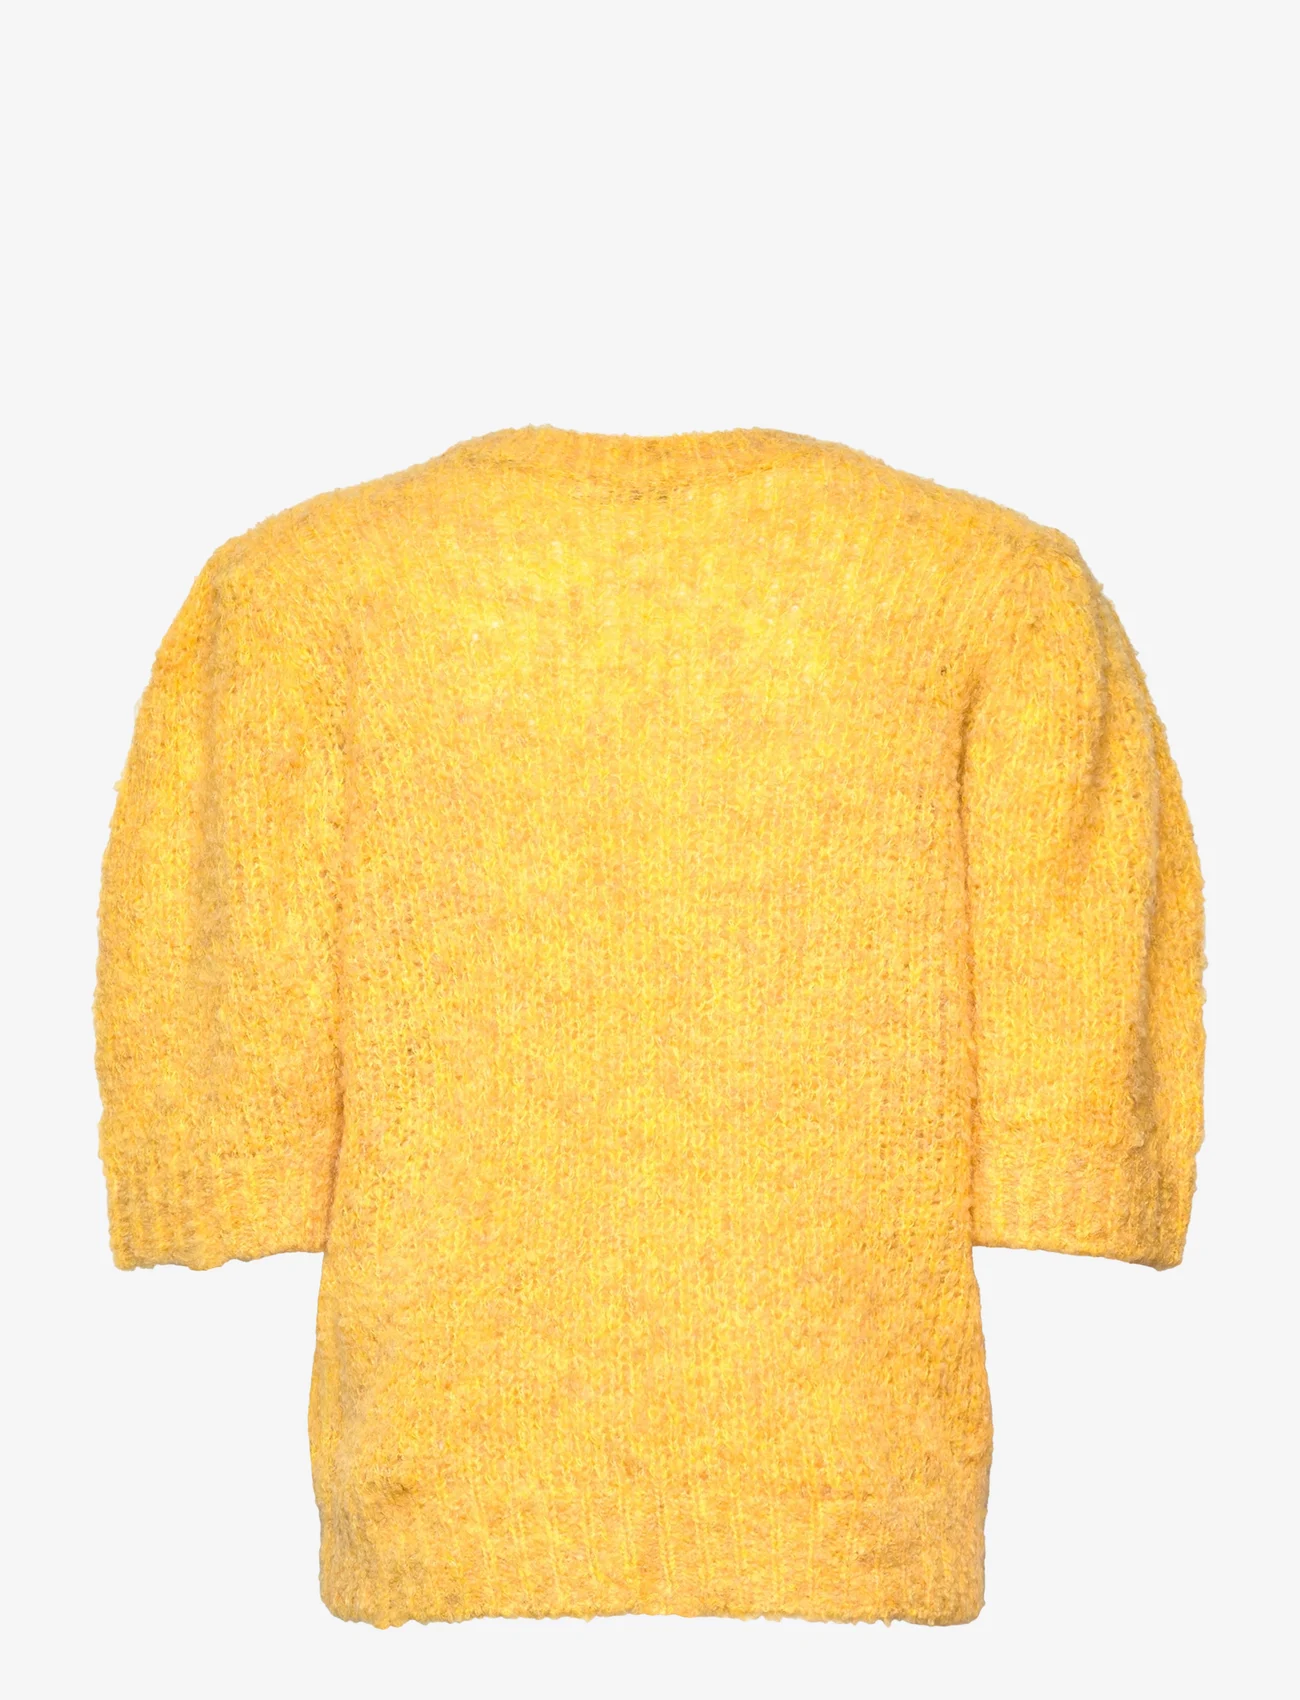 Coster Copenhagen - Knit with puff sleeves - lemon yellow - 1